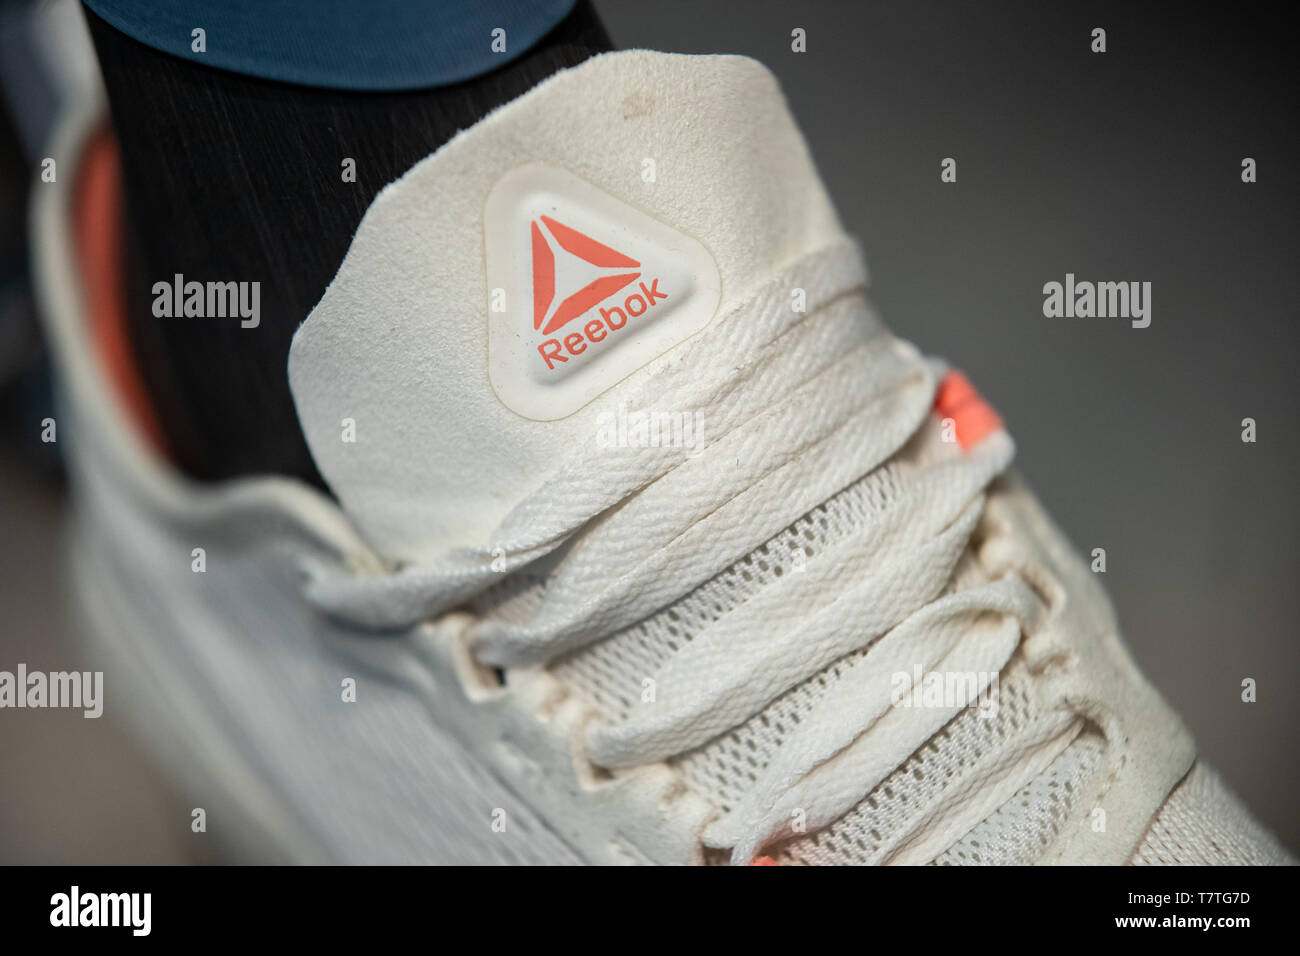 Page 3 - Reebok Logo High Resolution Stock Photography and Images - Alamy